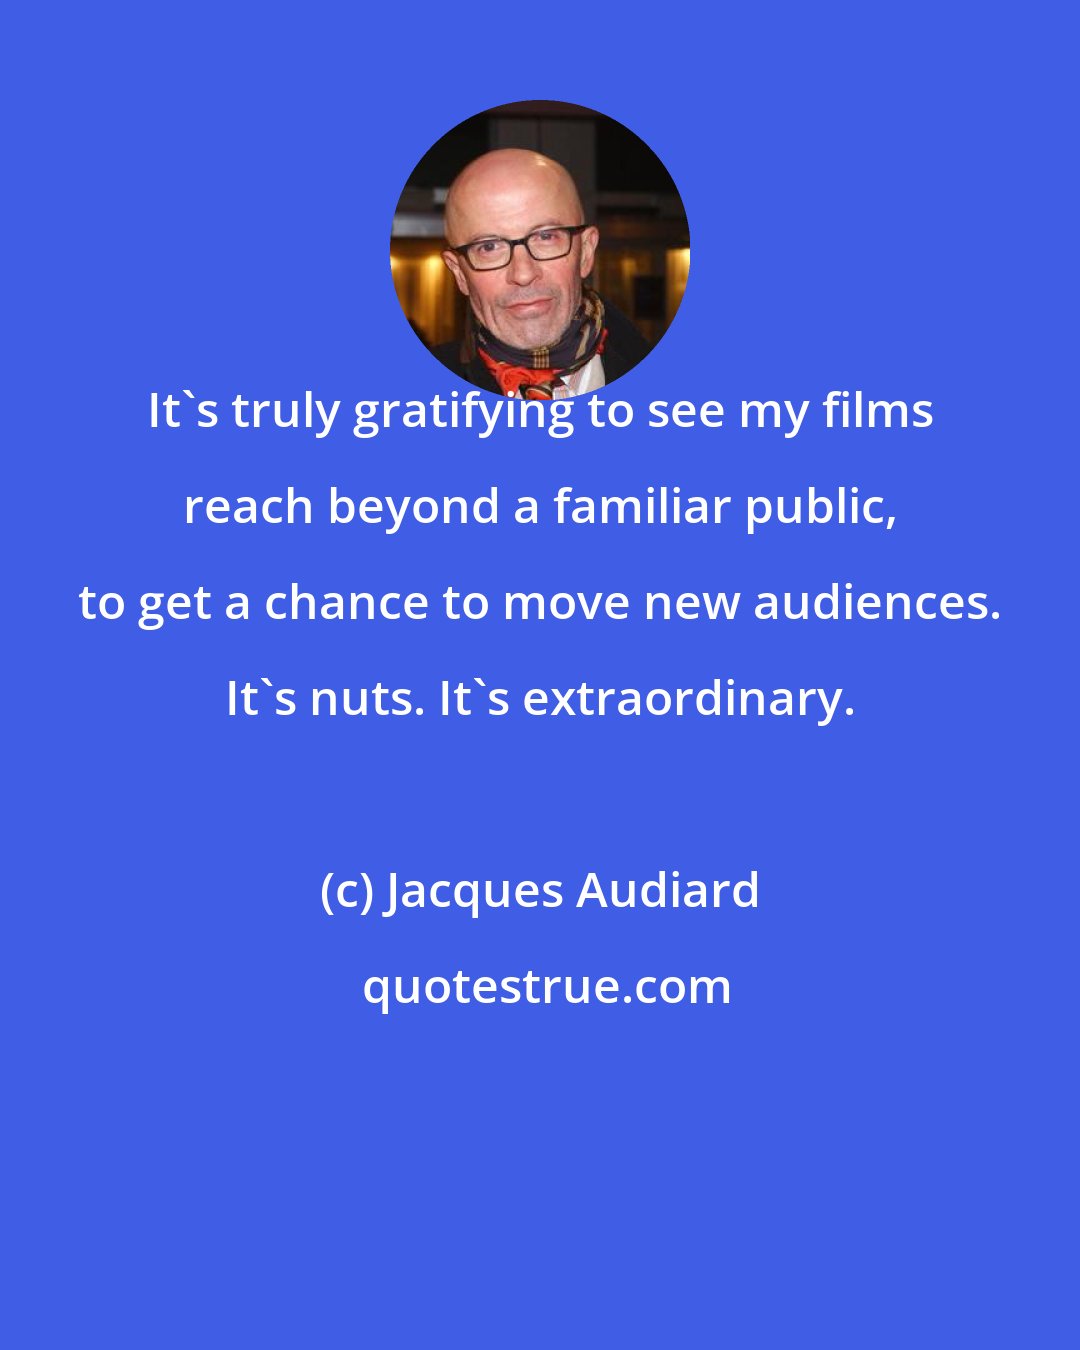 Jacques Audiard: It's truly gratifying to see my films reach beyond a familiar public, to get a chance to move new audiences. It's nuts. It's extraordinary.